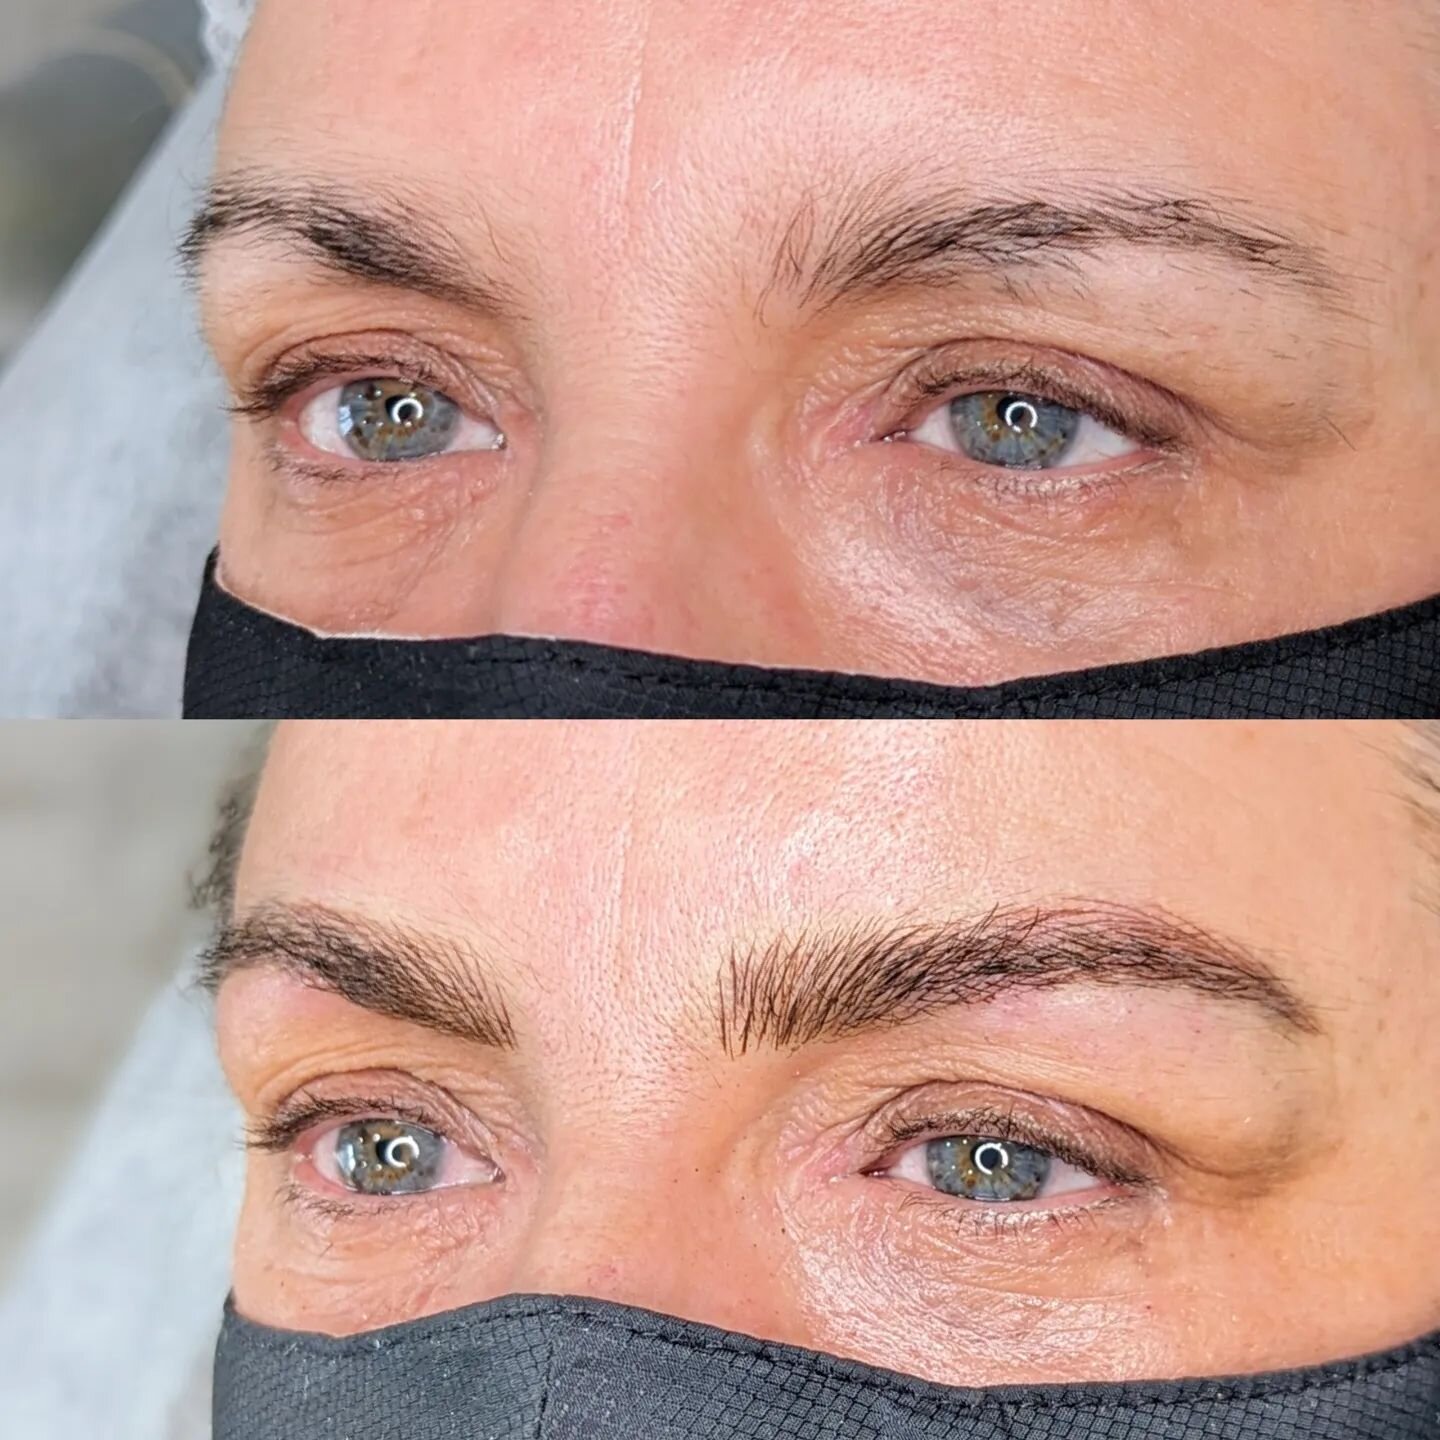 Beautiful new shaped brows built up with microbladed hairstrokes.

For enquiries, availability or to book please email me by clicking on the website link in my bio.

#microblading #eyebrows #browtattoo #wynyard #permanentmakeup #powderbrows #ombr&eac